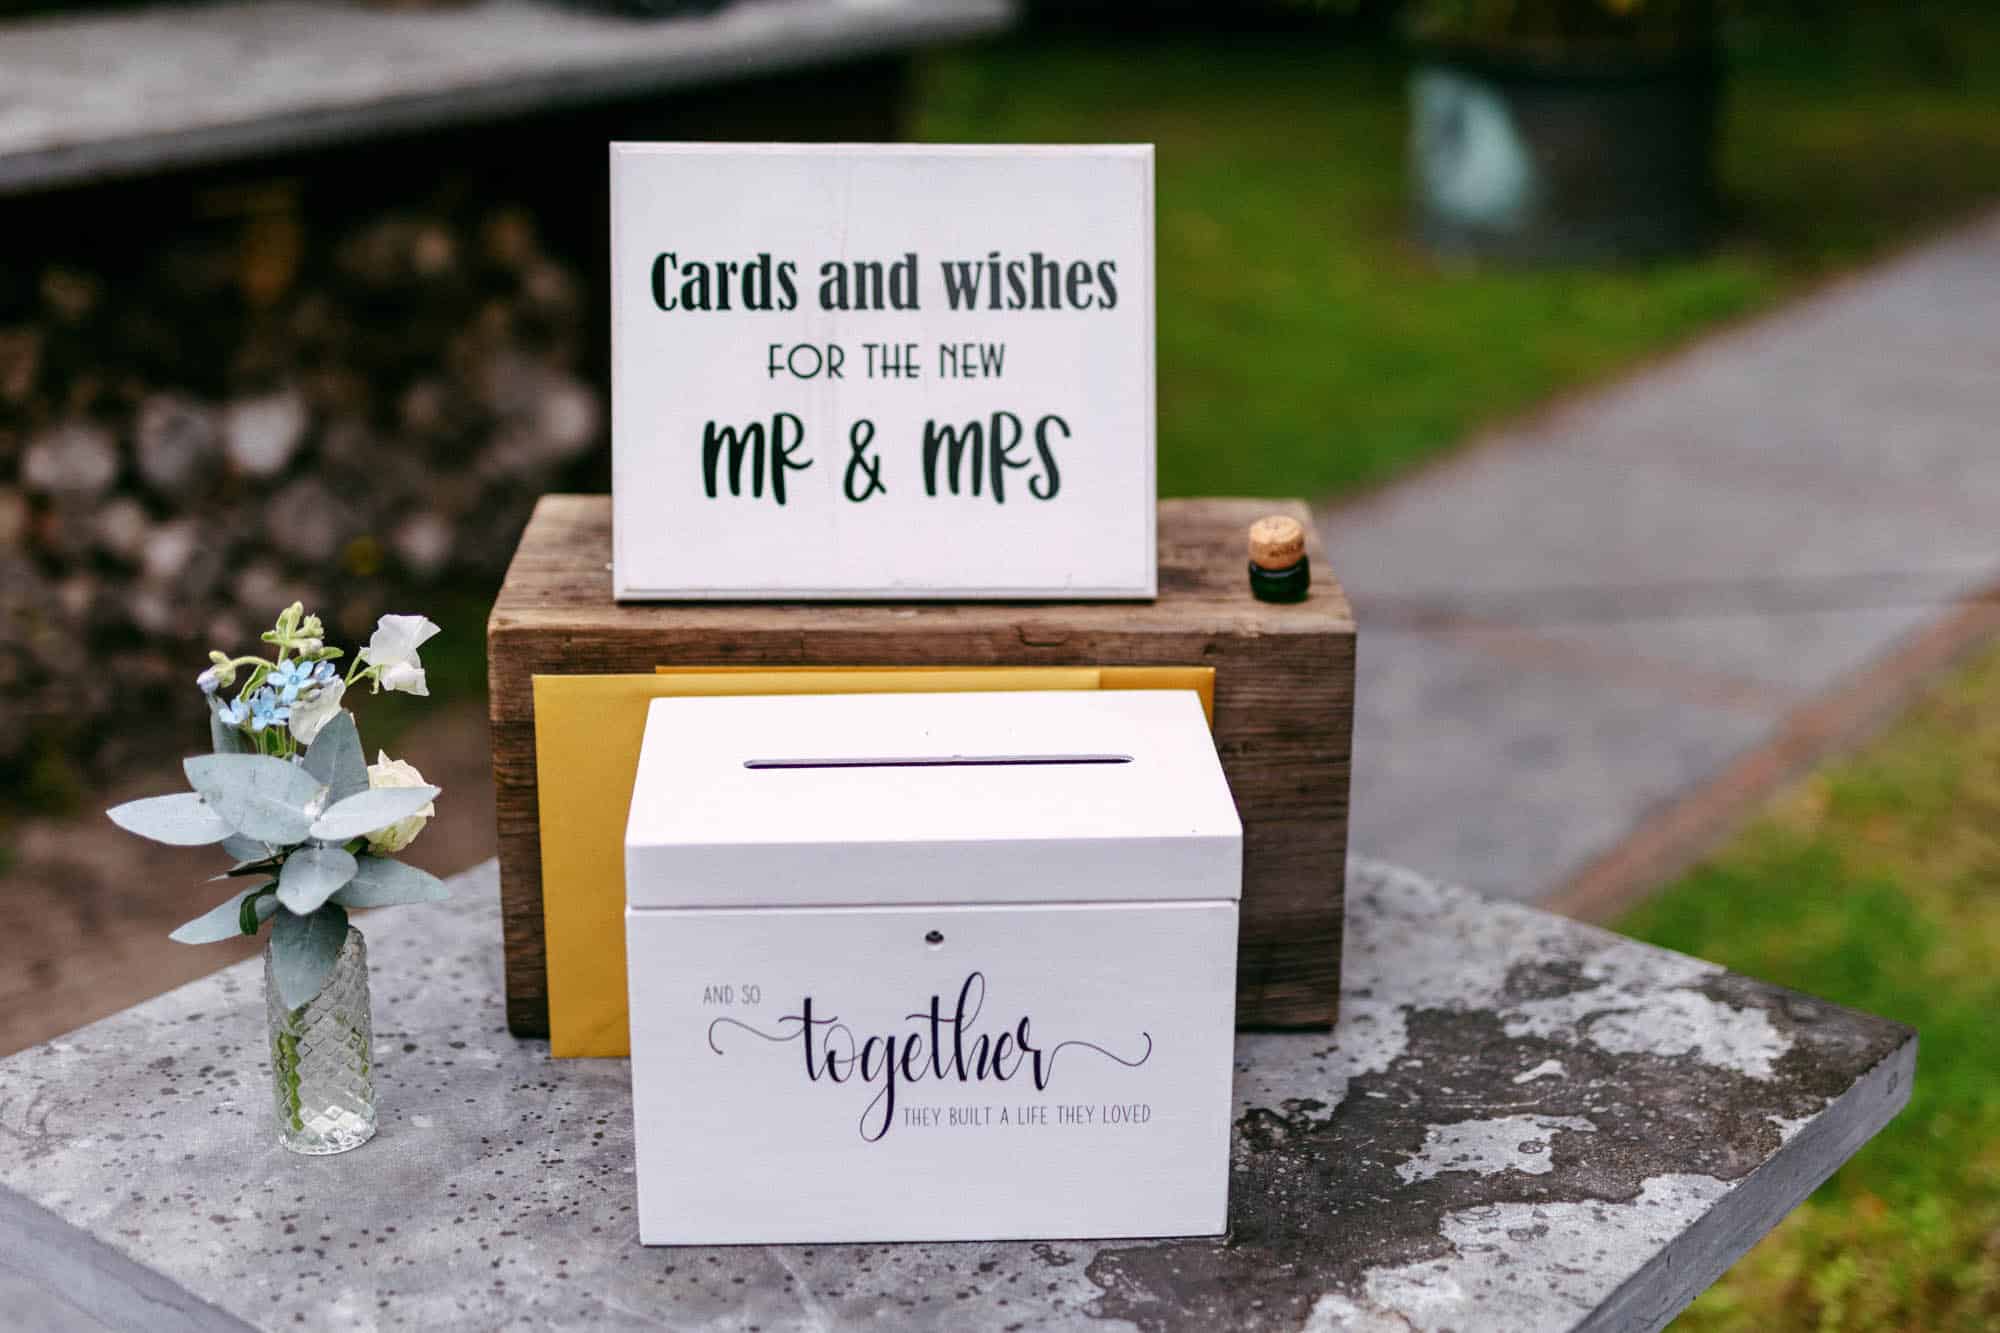 Wishes for Mr and Mrs on their special day, along with cards to commemorate their wedding anniversary.